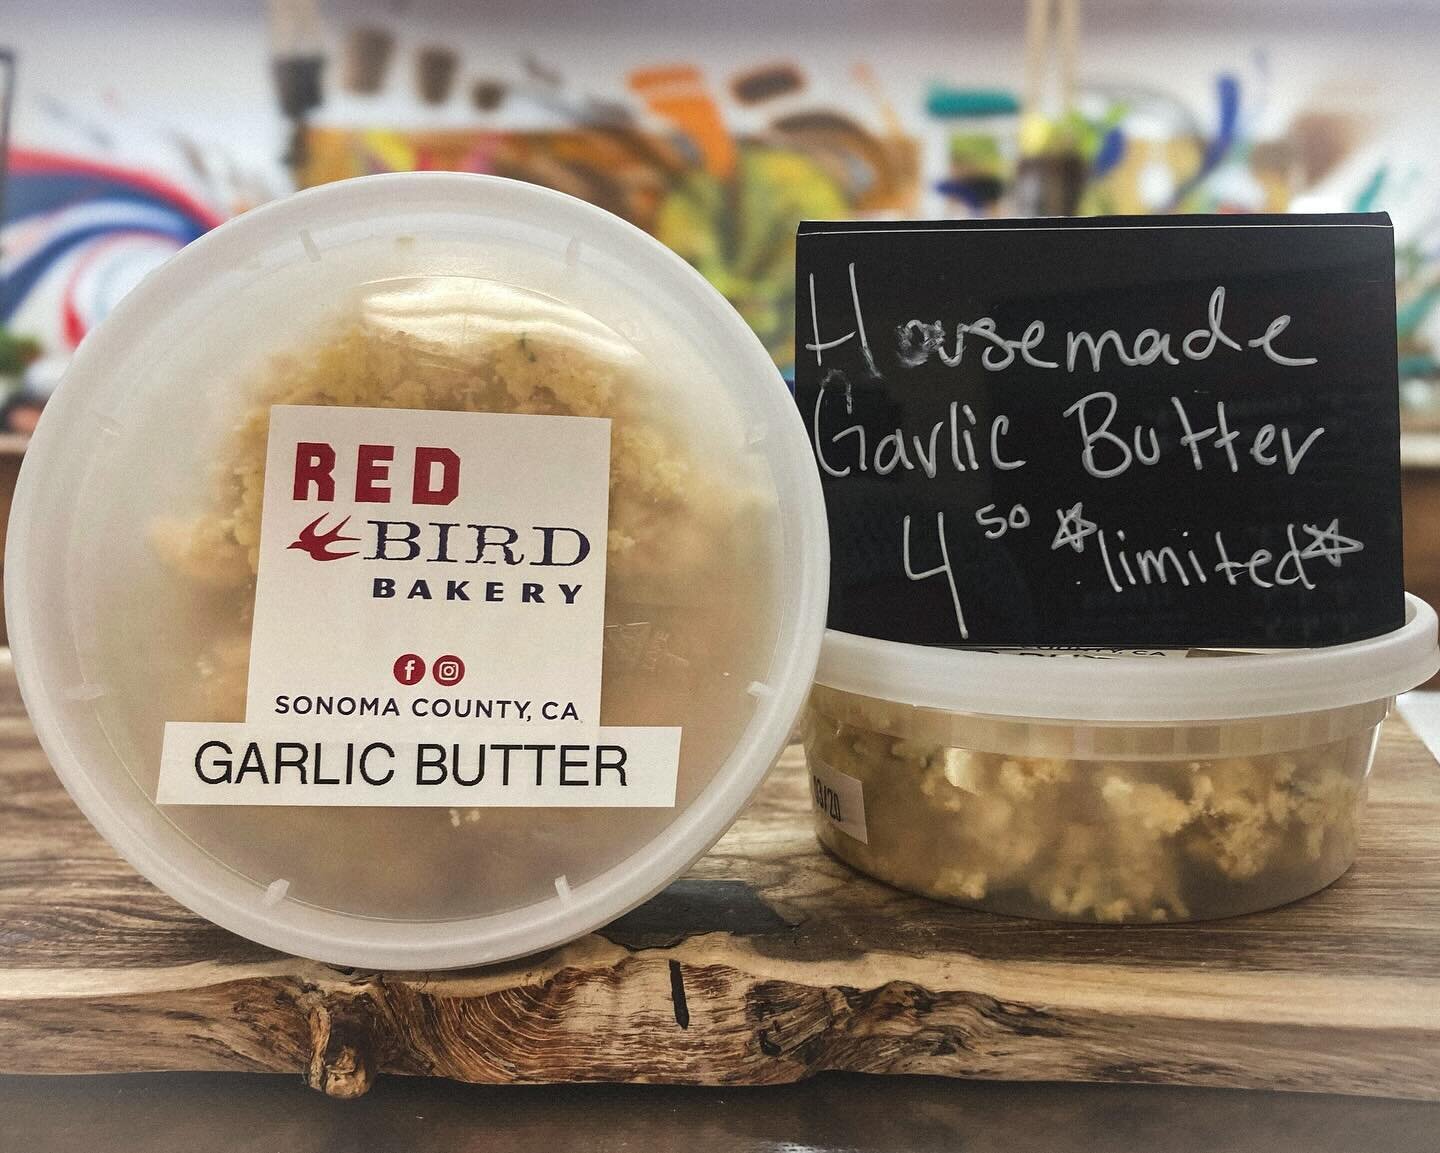 New Items For the Weekend!!! The Perfect Pairing for Your Toast! ~ Our House Made Garlic Butter, Olive Tapenade and Our Lemon Curd! All Made In House, All Are Delicious and Available Now For a Limited Time!!! Make Your Baguette Sing! ❤️&zwj;🔥❤️&zwj;